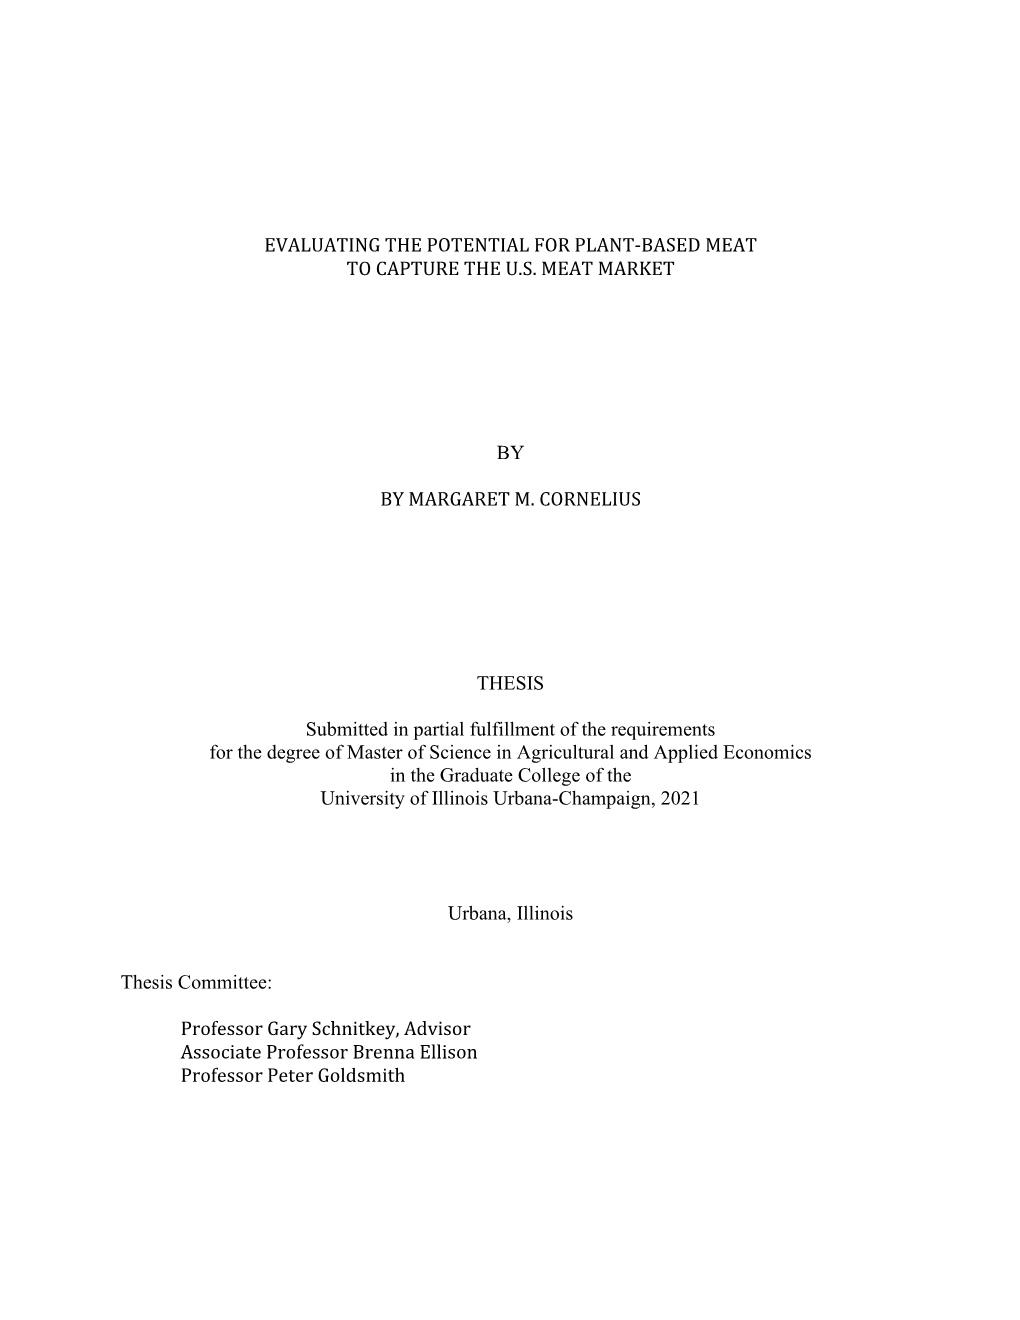 EVALUATING the POTENTIAL for PLANT-BASED MEAT to CAPTURE the U.S. MEAT MARKET by by MARGARET M. CORNELIUS THESIS Submitted in P